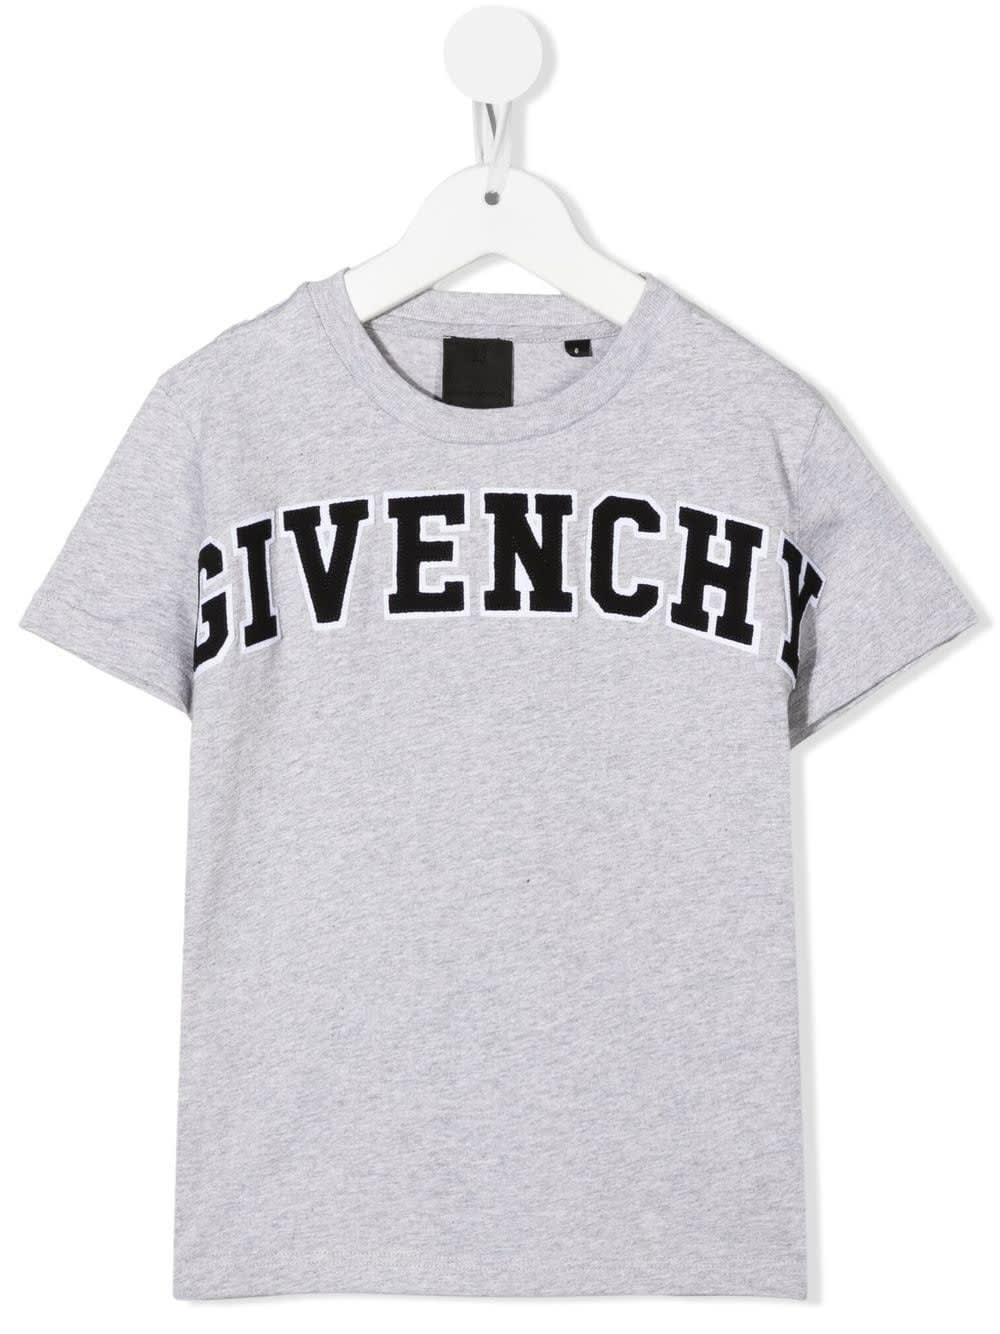 Kids Grey T-shirt With Givenchy Old School Print